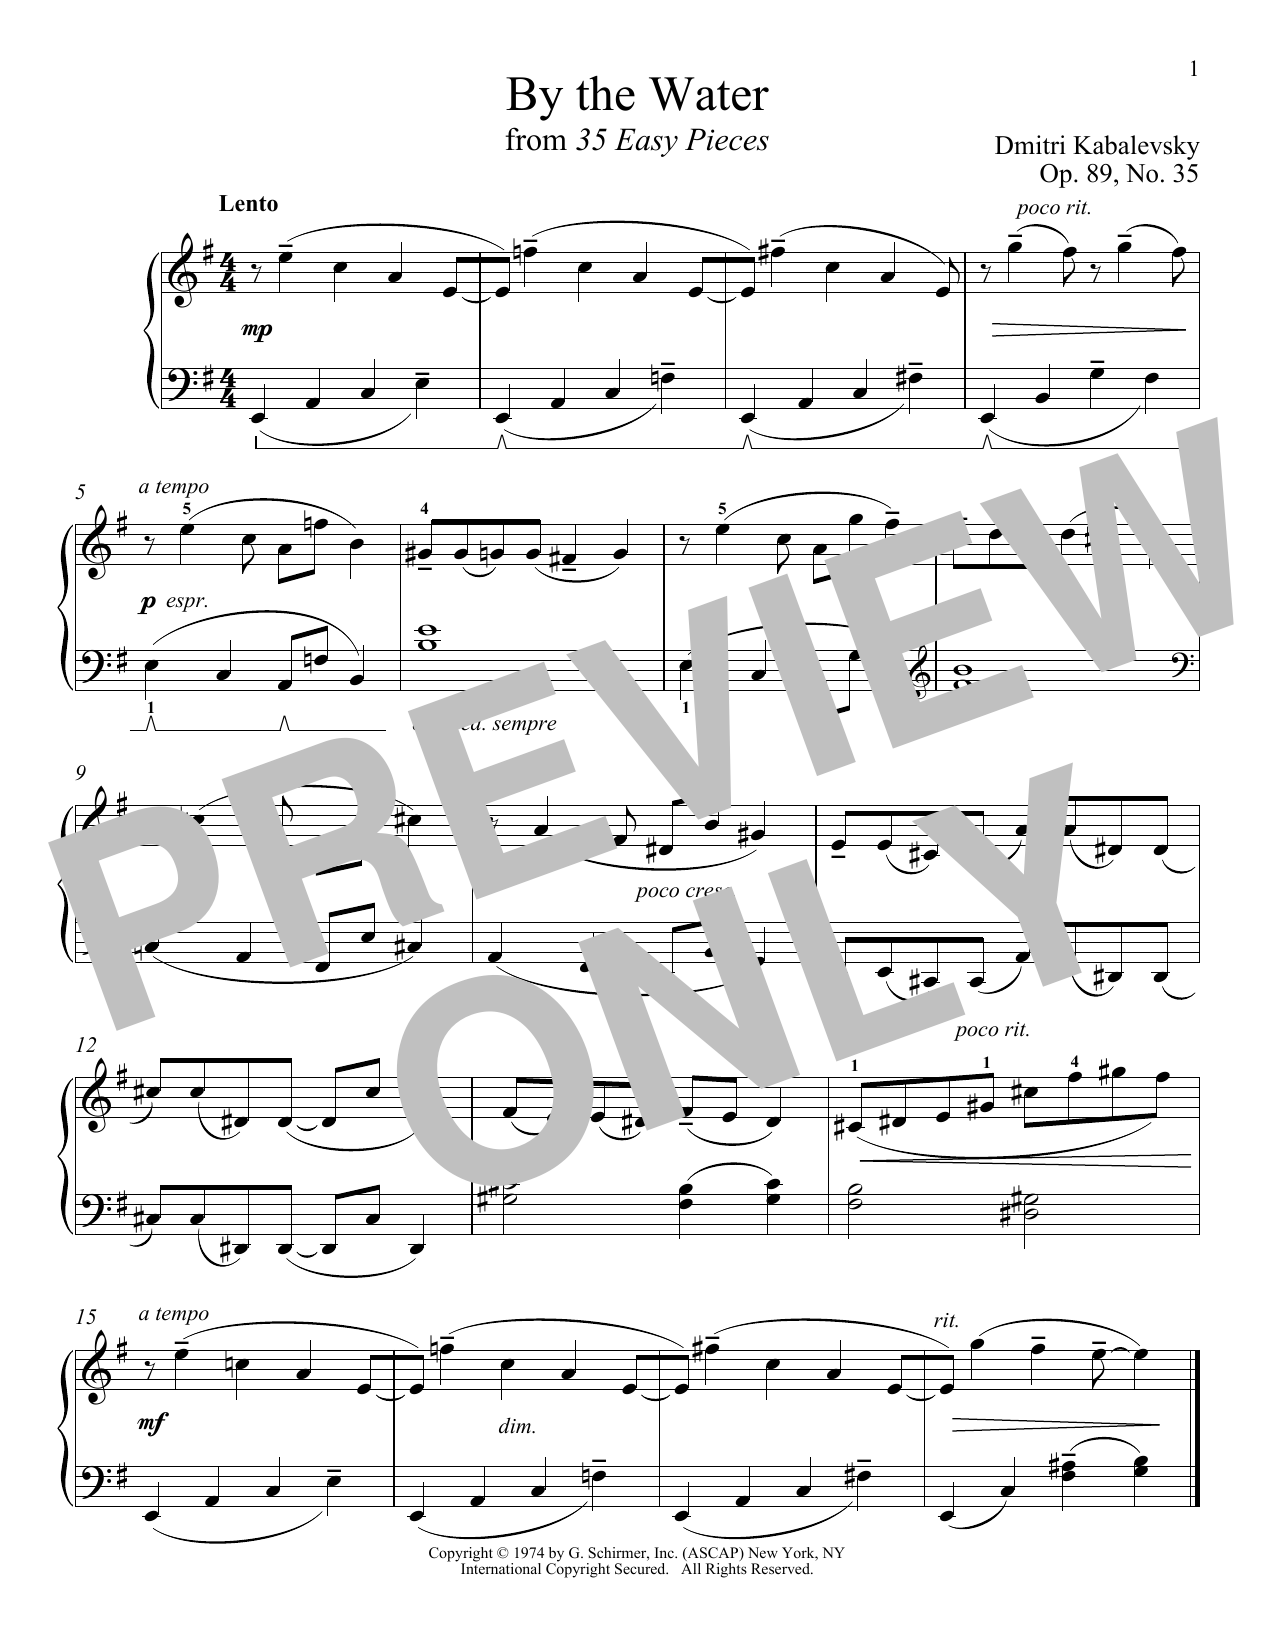 Download Dmitri Kabalevsky By The Water, Op. 89, No. 35 Sheet Music